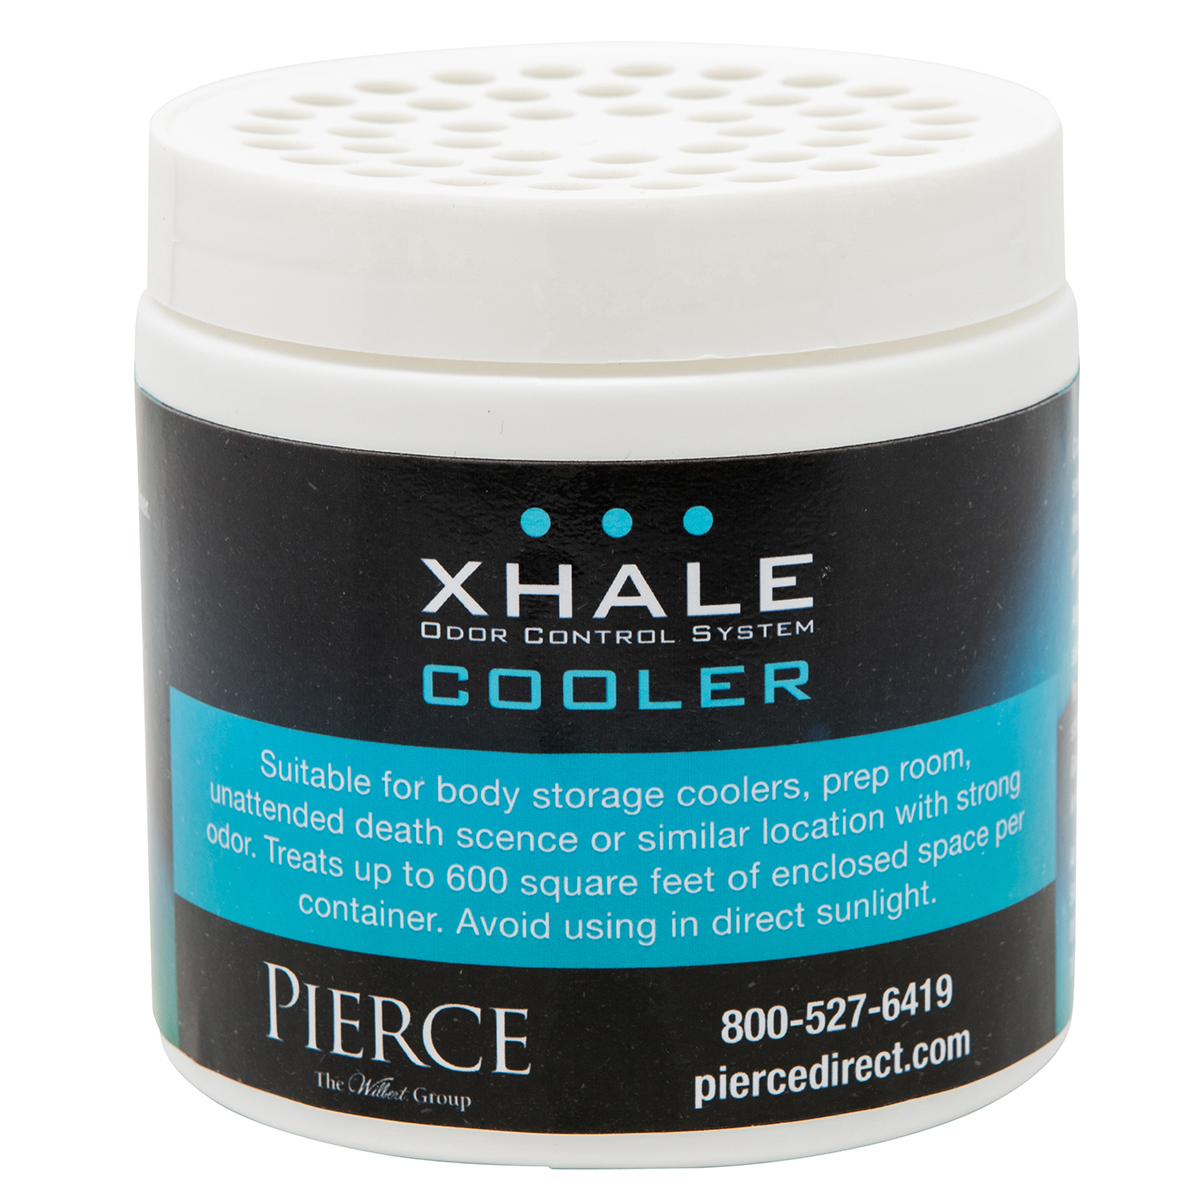 PW0418044 - XHALE COOLER : 